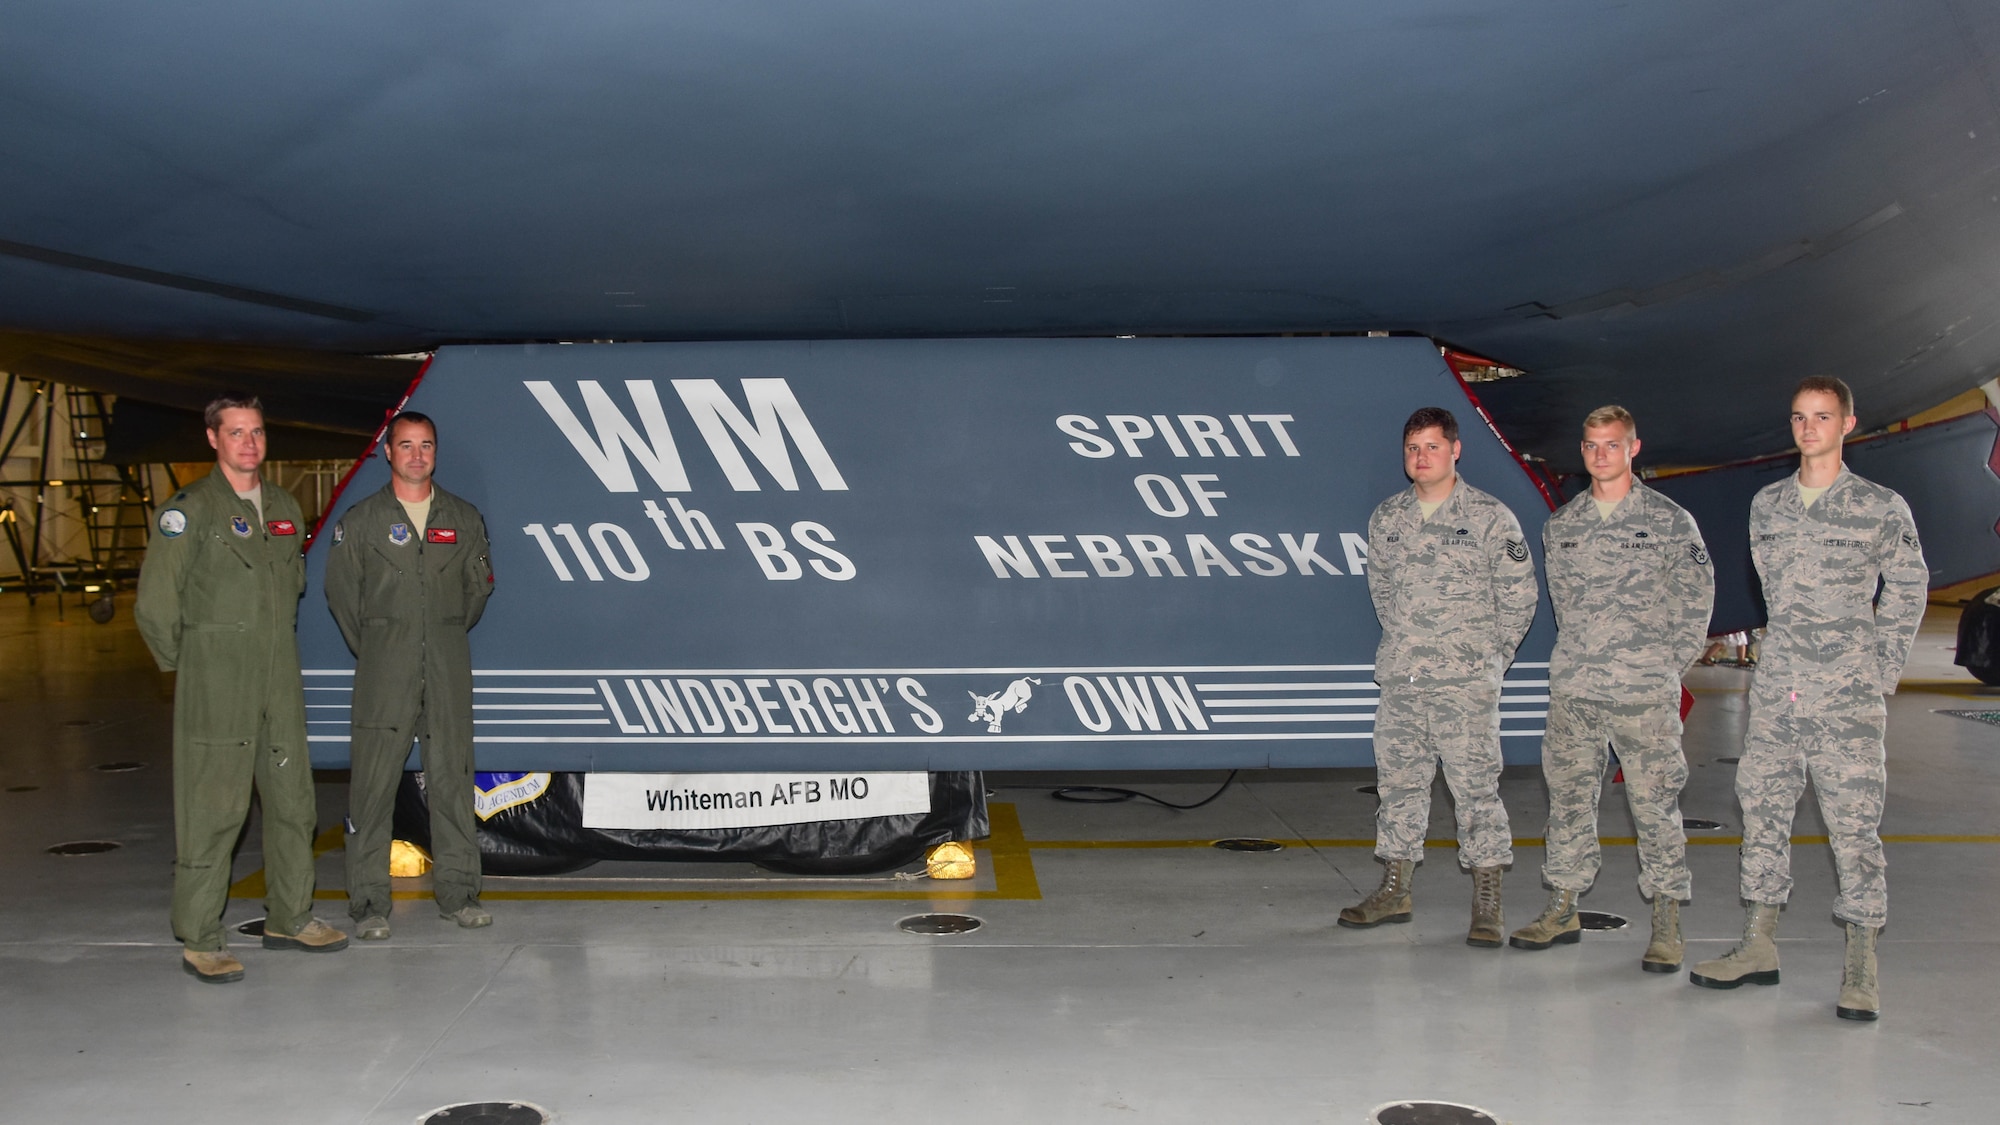 The dedicated pilots and aircraft crew chiefs for the Spirit of Nebraska, a B-2 bomber, gather after a new paint scheme with the slogan “Lindbergh’s Own” on a gear door was unveiled at Whiteman Air Force Base, Missouri, Aug. 4, 2018. The slogan is associated with the 110th Bomb Squadron, a subordinate unit of the Whiteman based 131st Bomb Wing, and commemorates the late Charles A. Lindbergh, the unit’s most famous member.